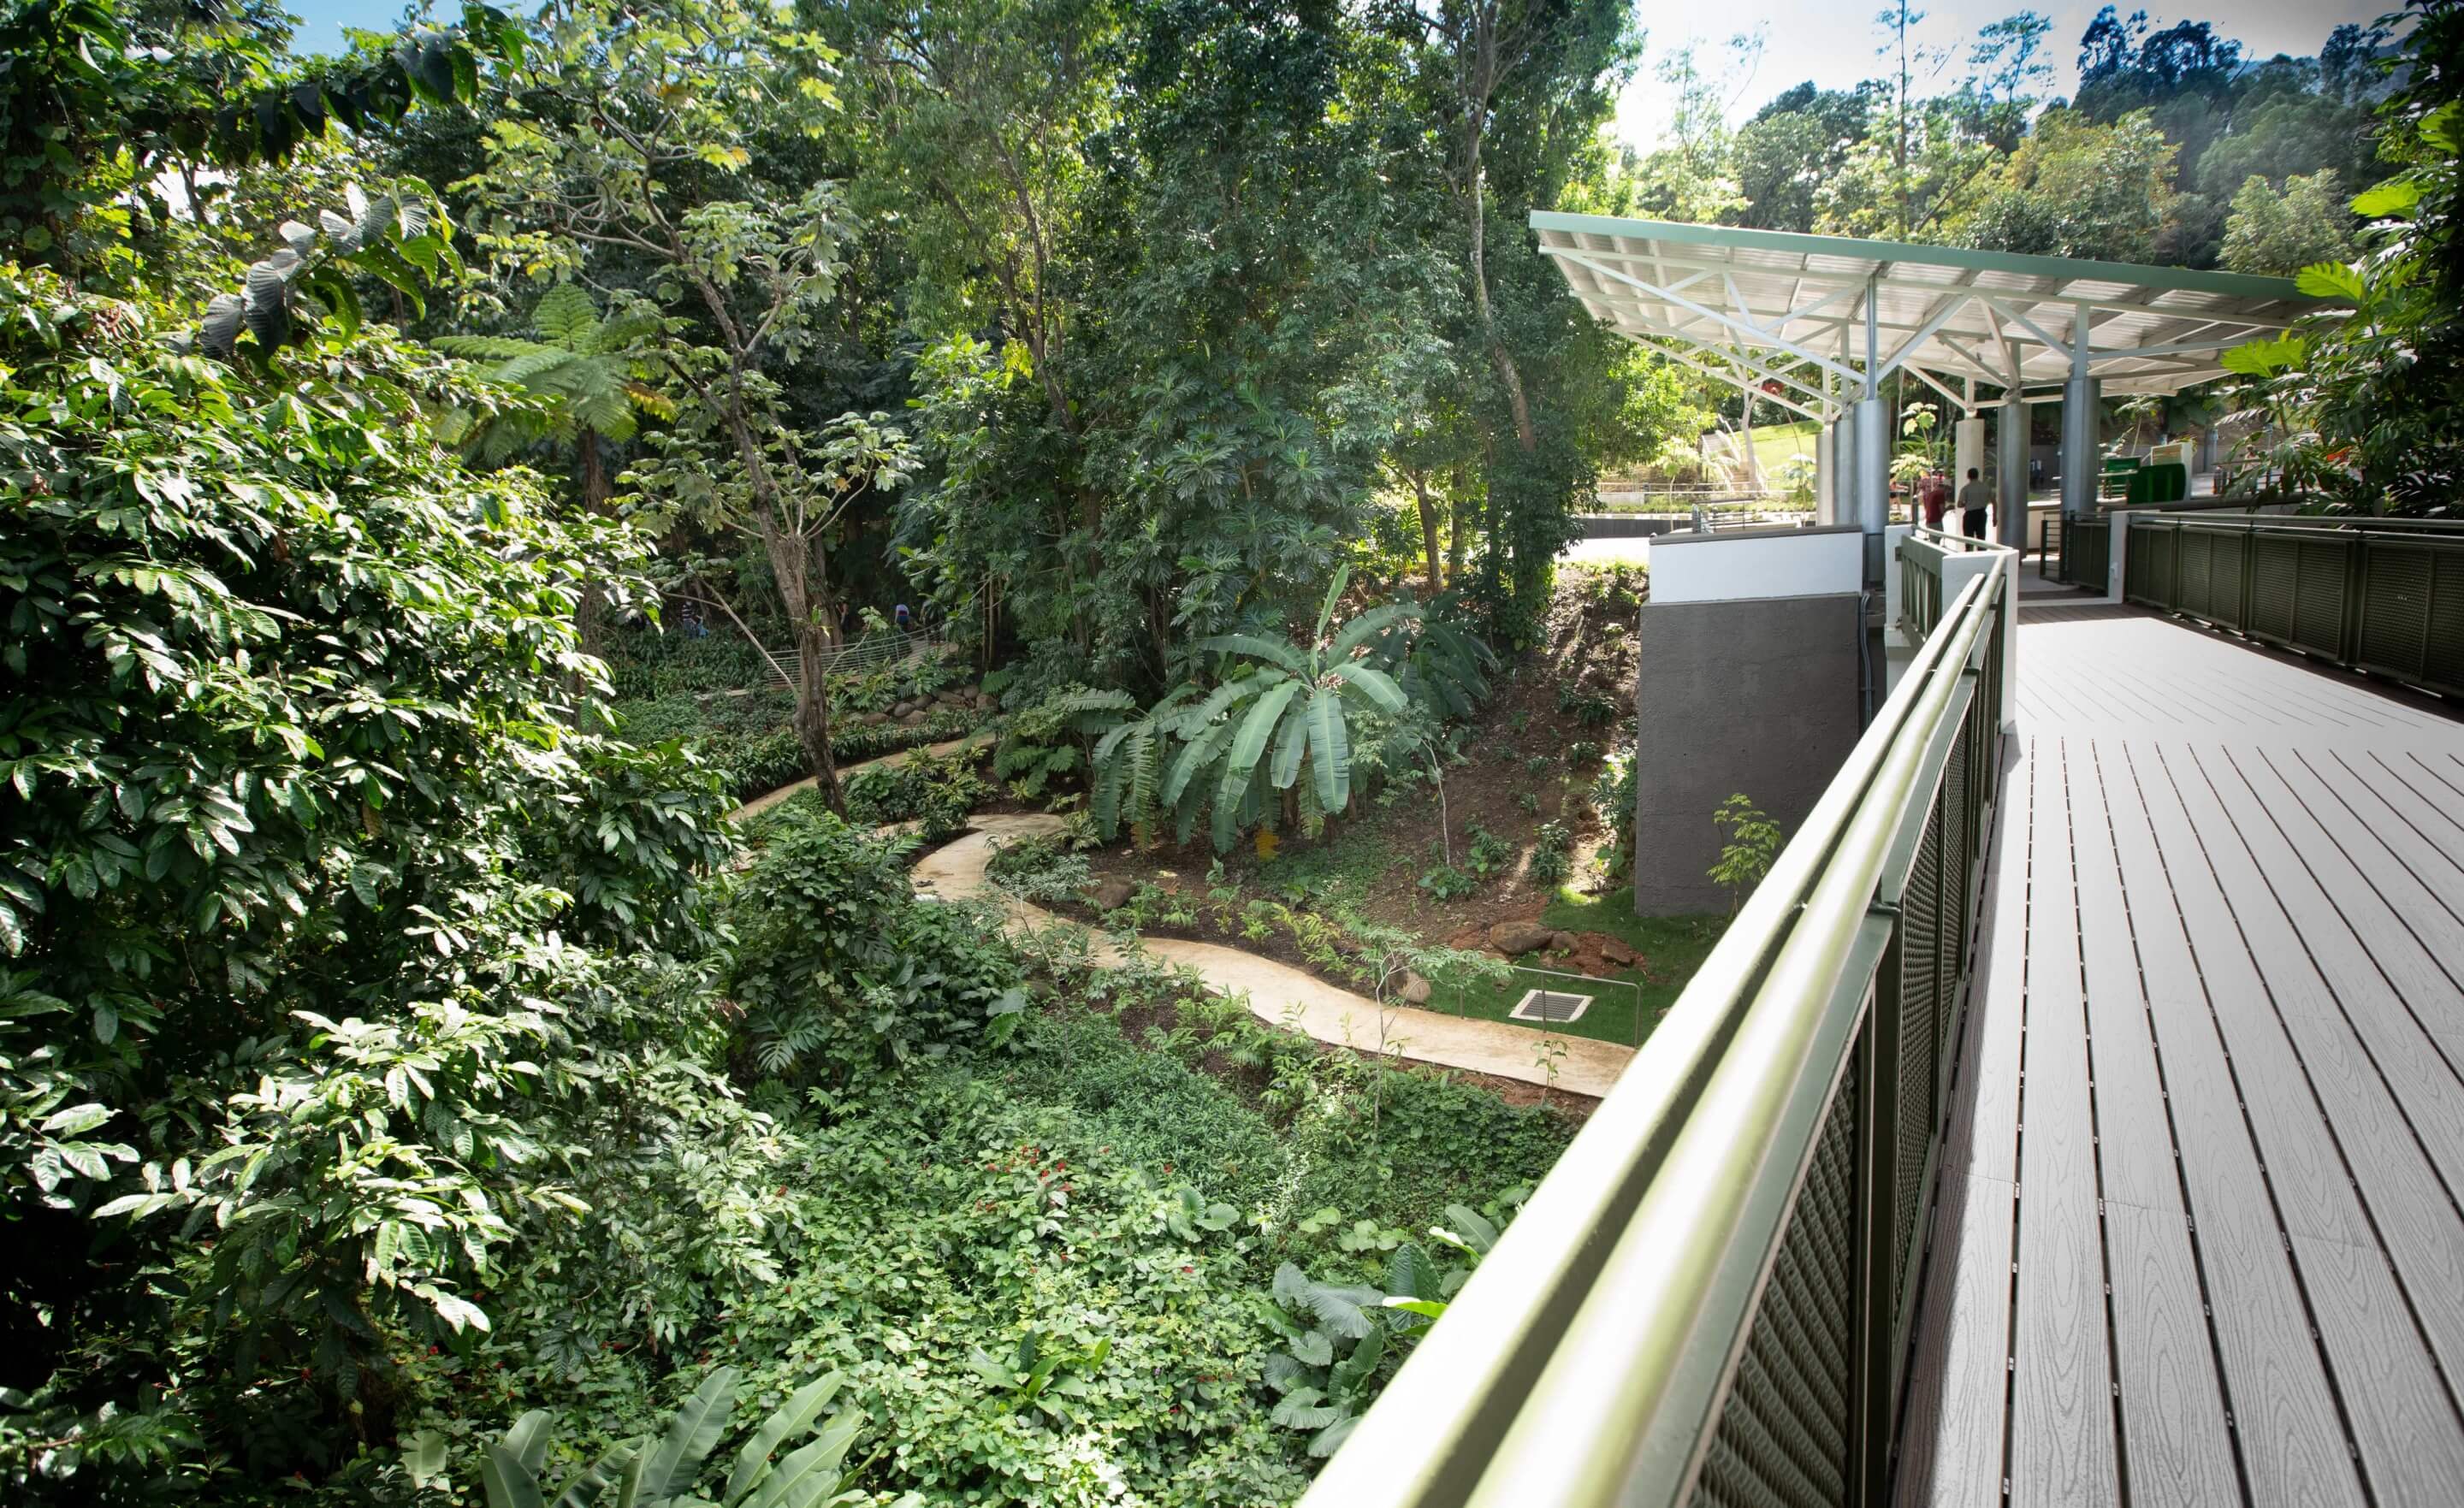 an elevated pathway above a tropical garden